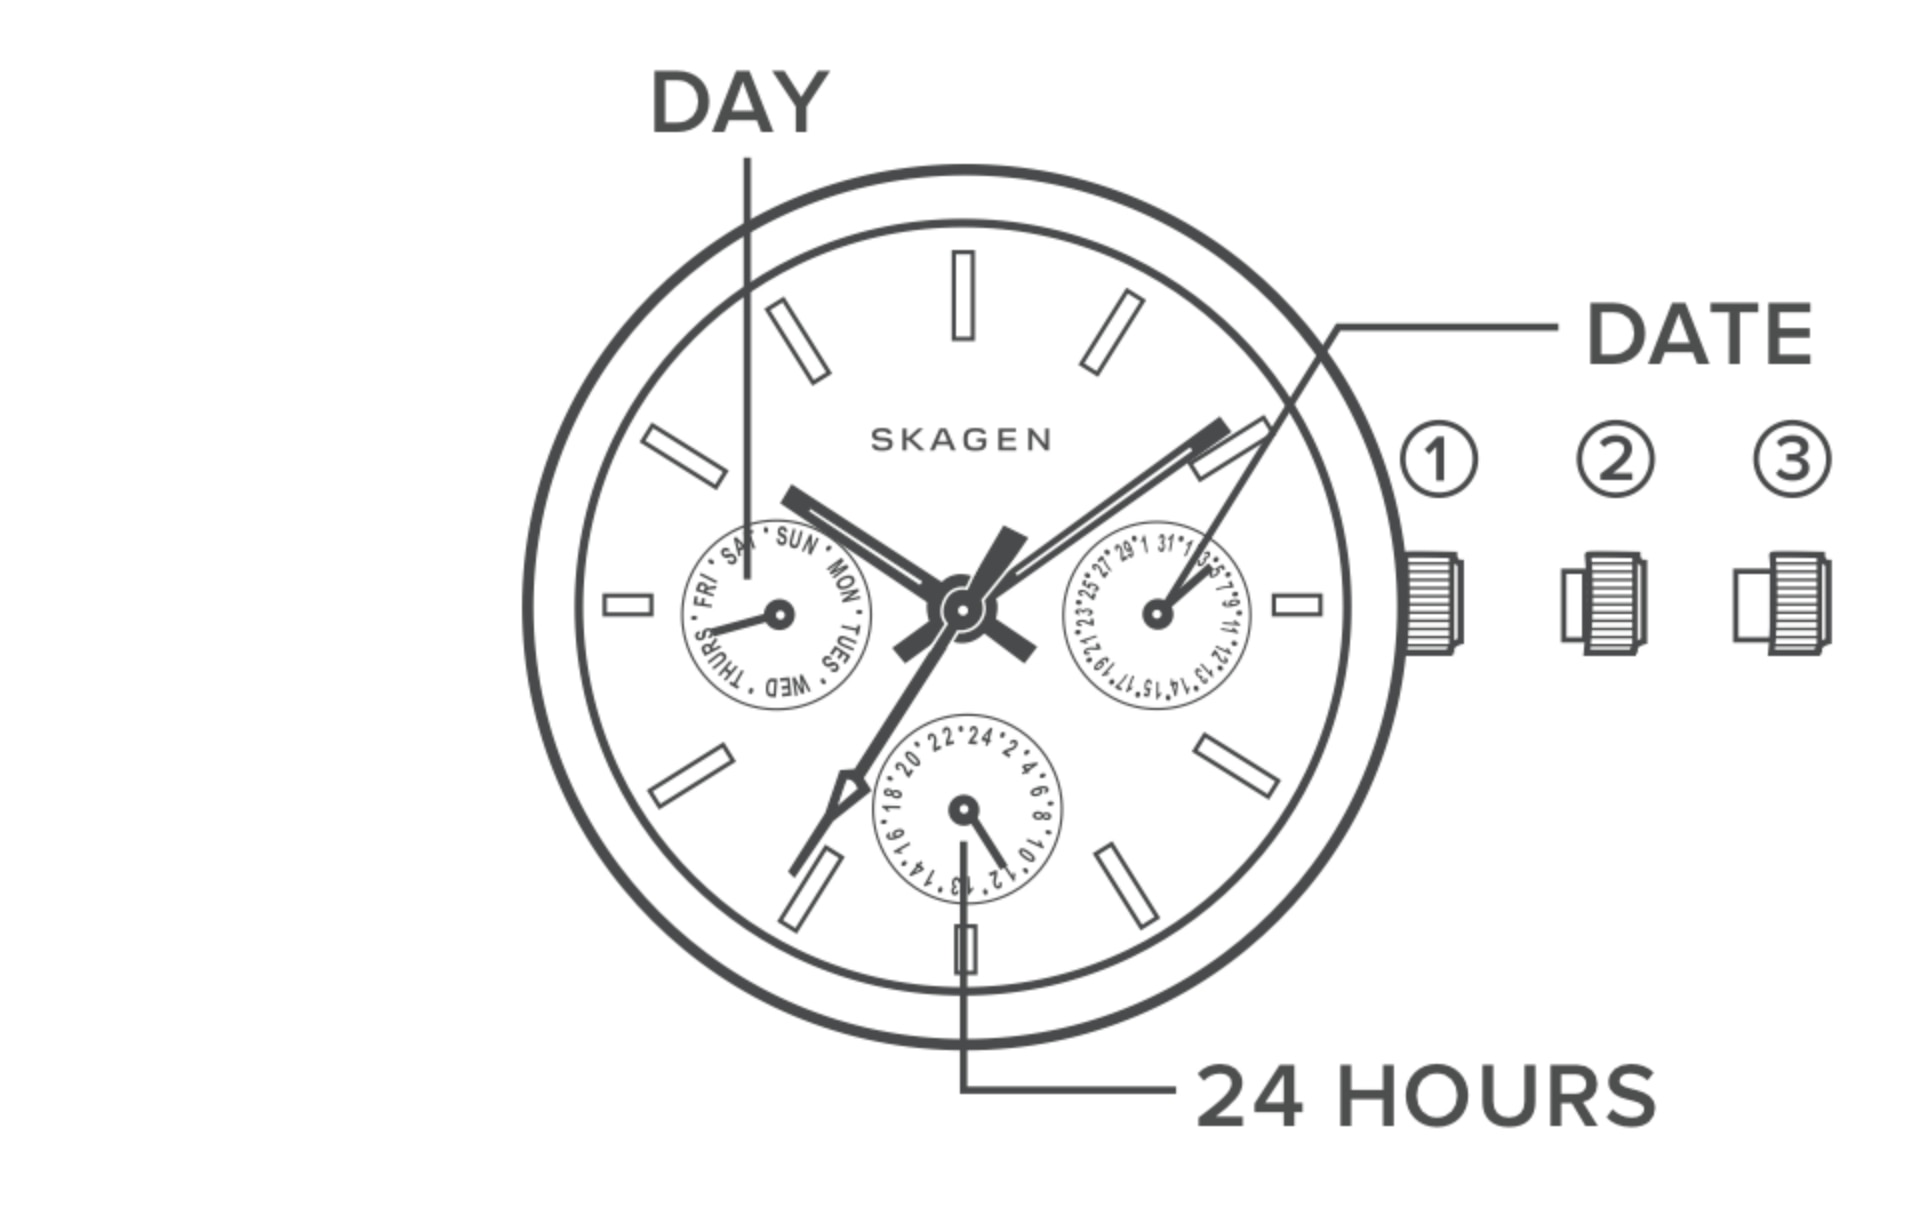 line art of a multifunction watch dial, identifying the crown, day, date, and 24 hour hand.